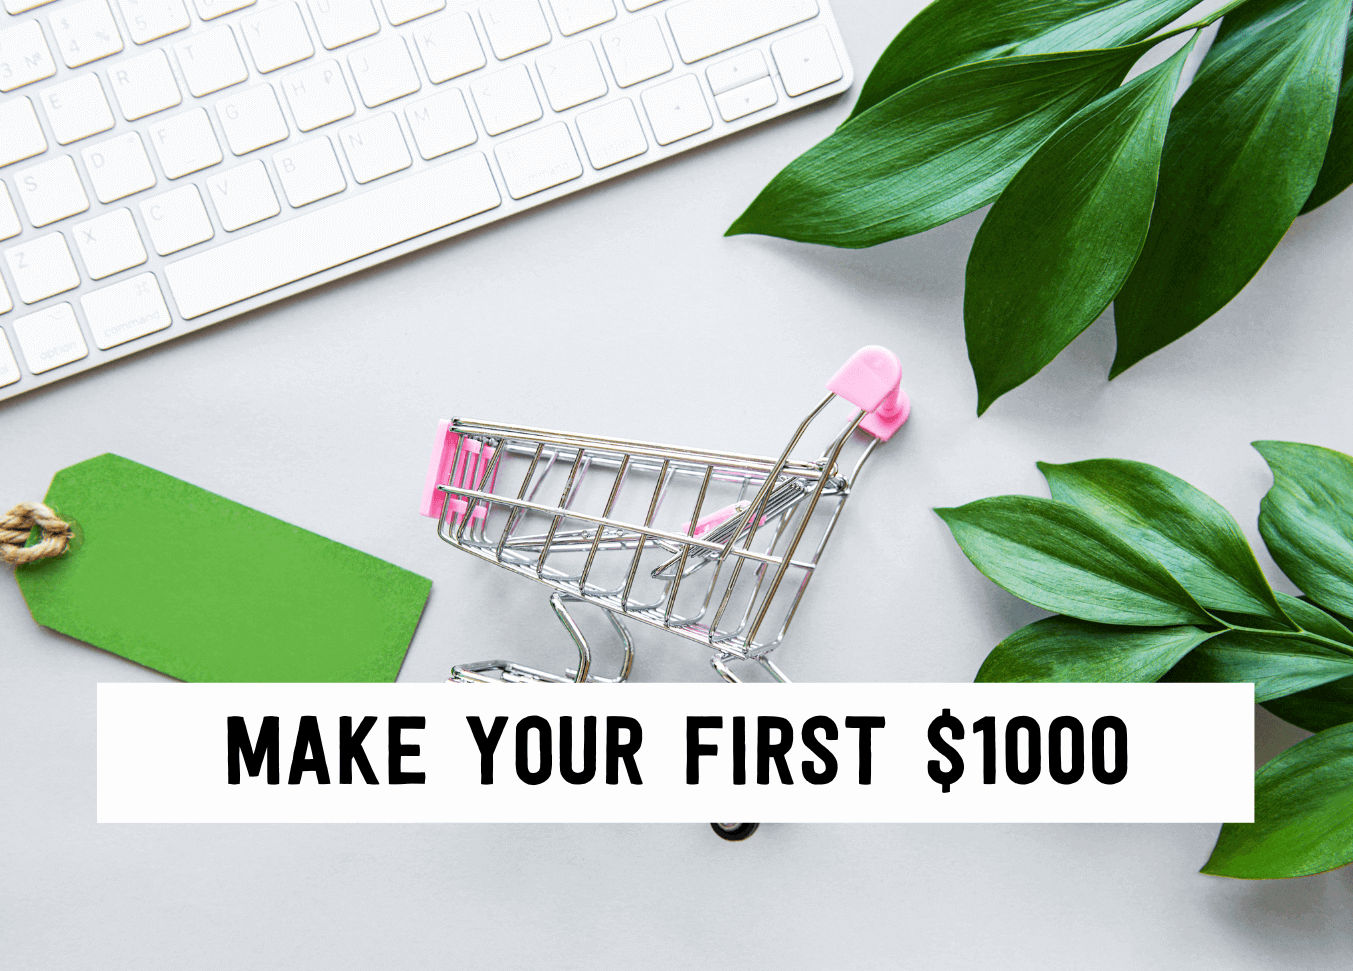 Make your first $1000 | Tizzit.co - start and grow a successful handmade business